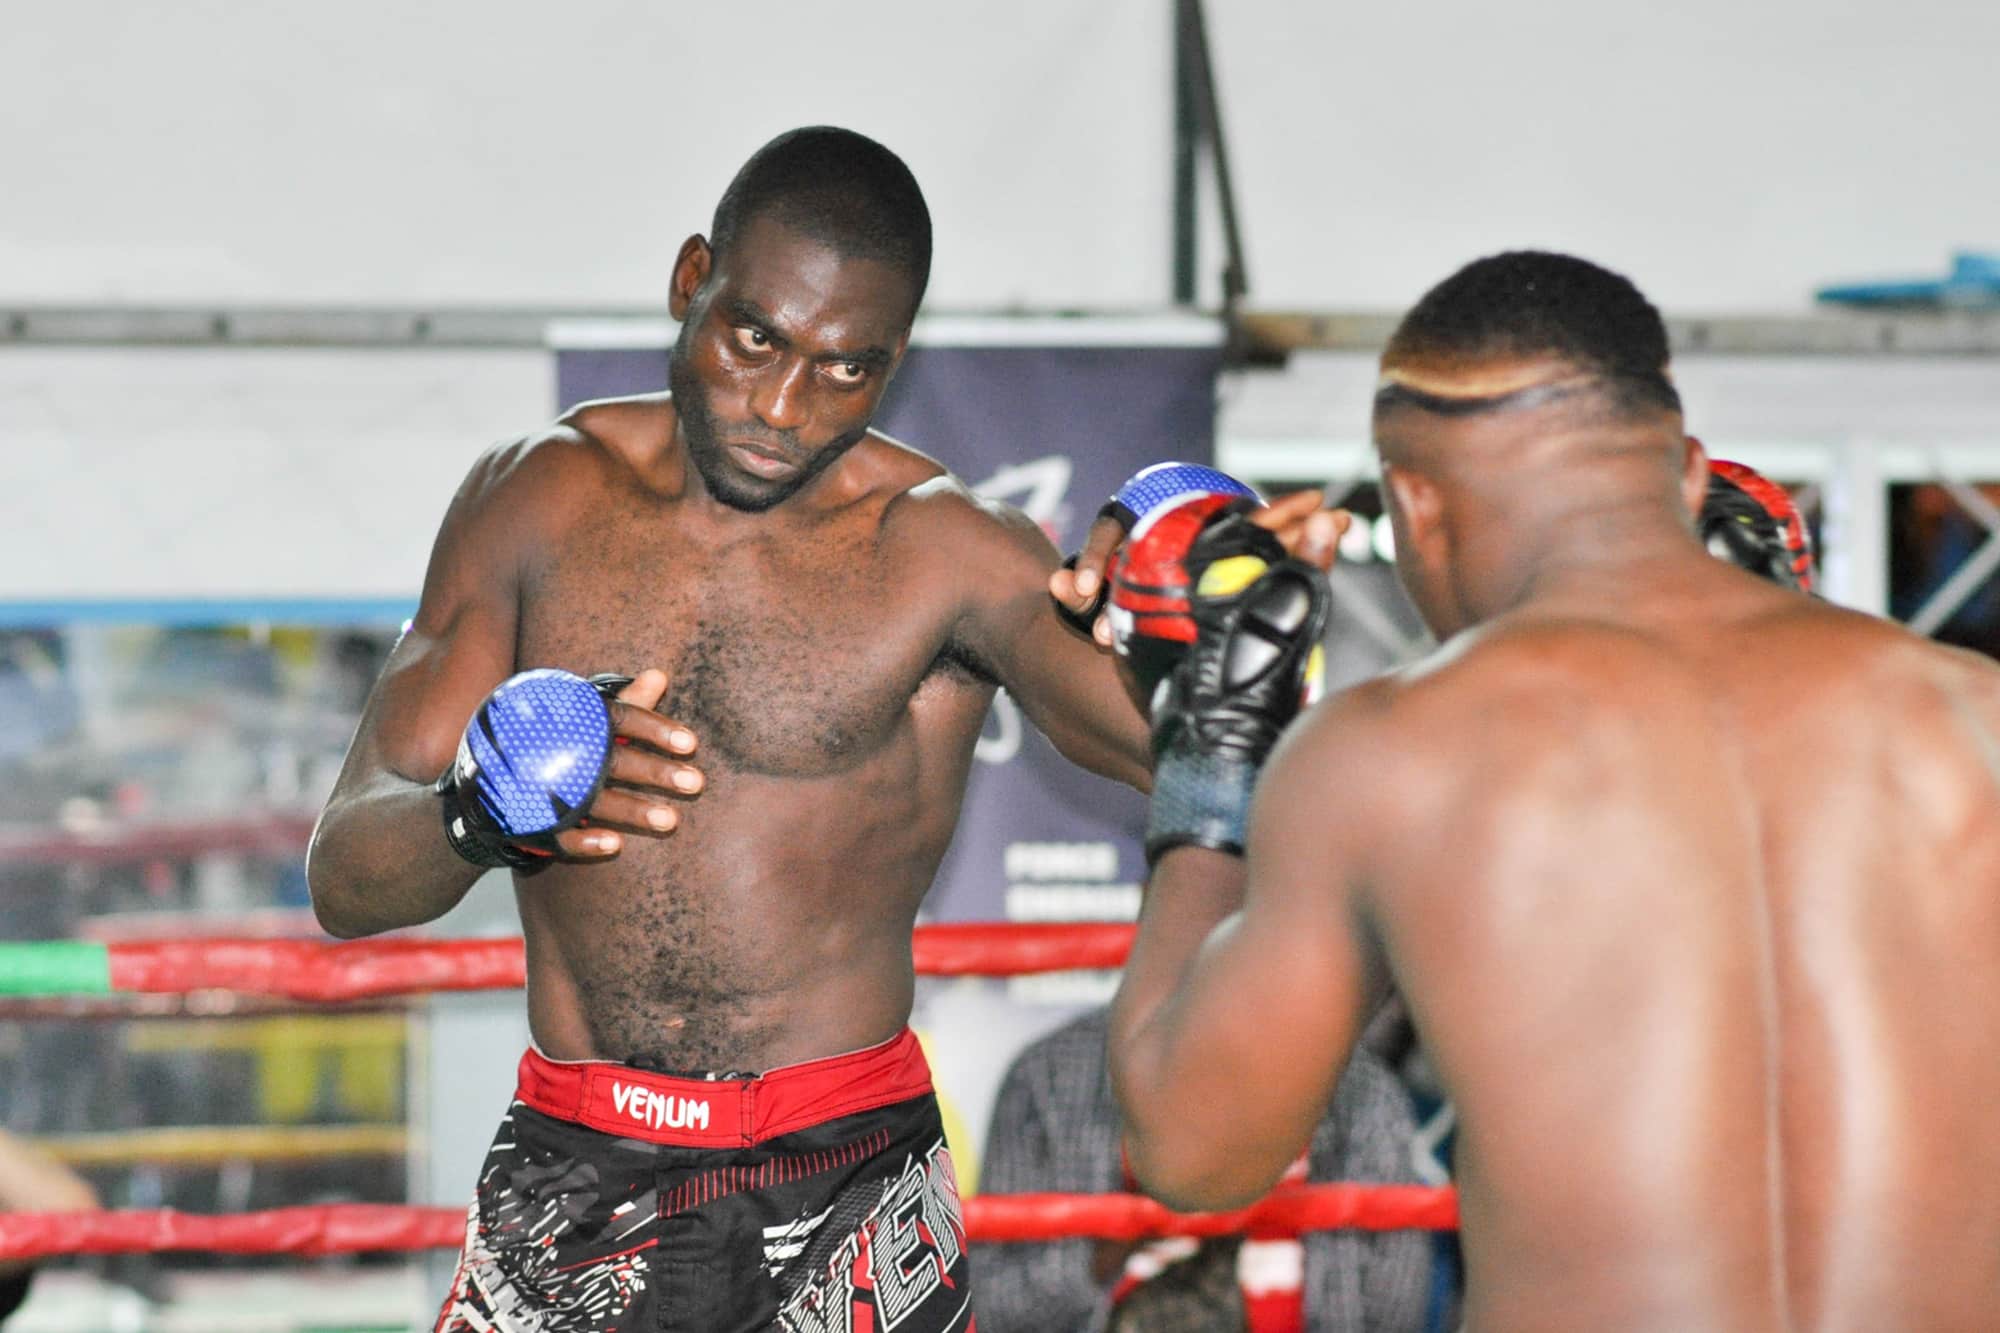 Latest Cameroon MMA event shows potential in Africa